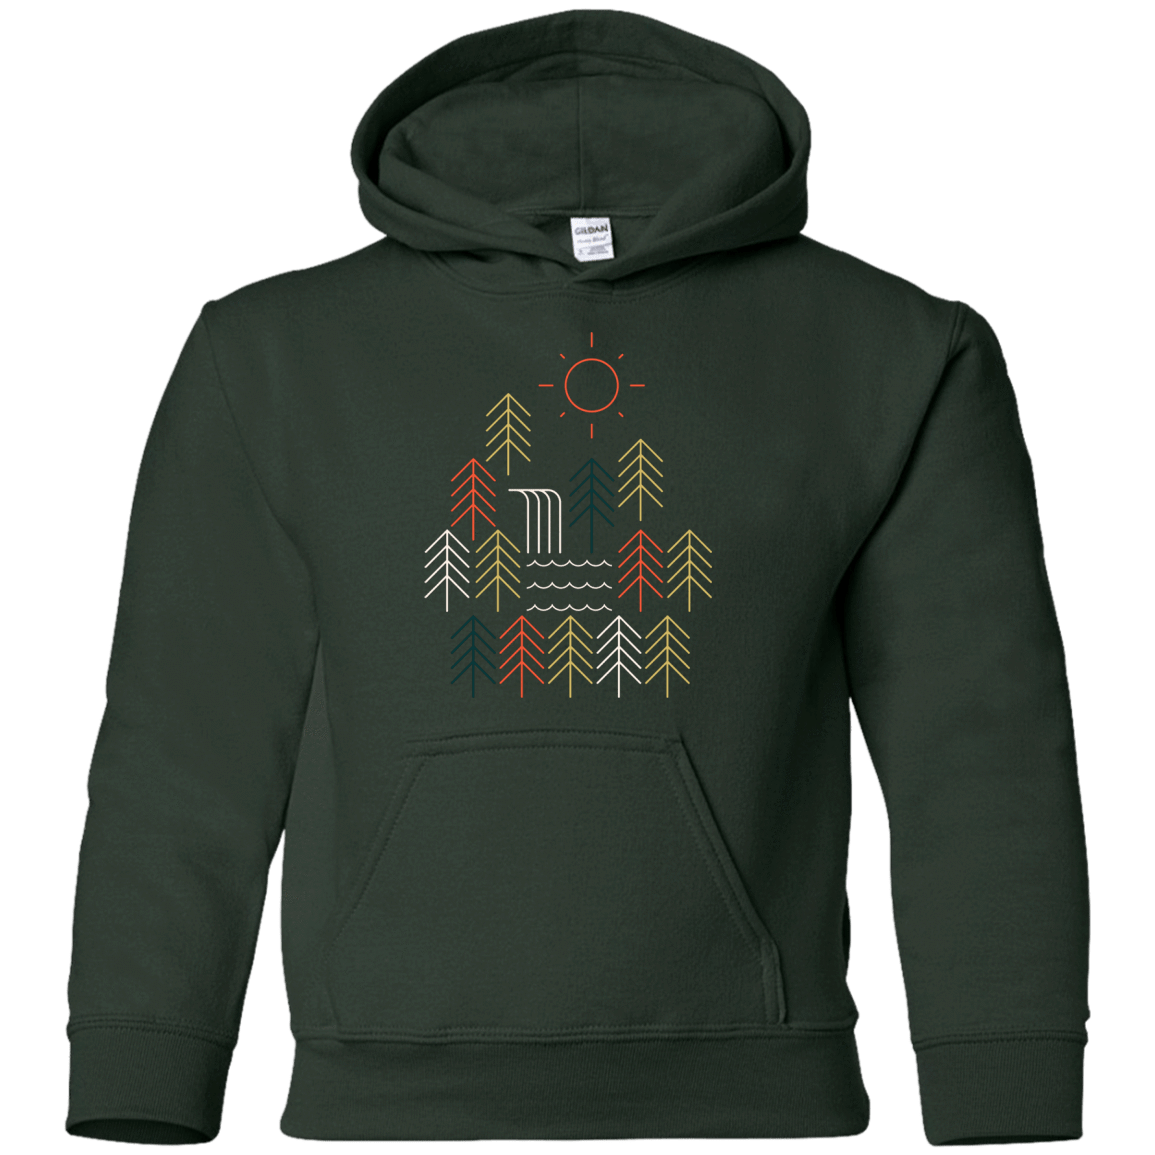 Sweatshirts Forest Green / YS Nature Timestee Youth Hoodie